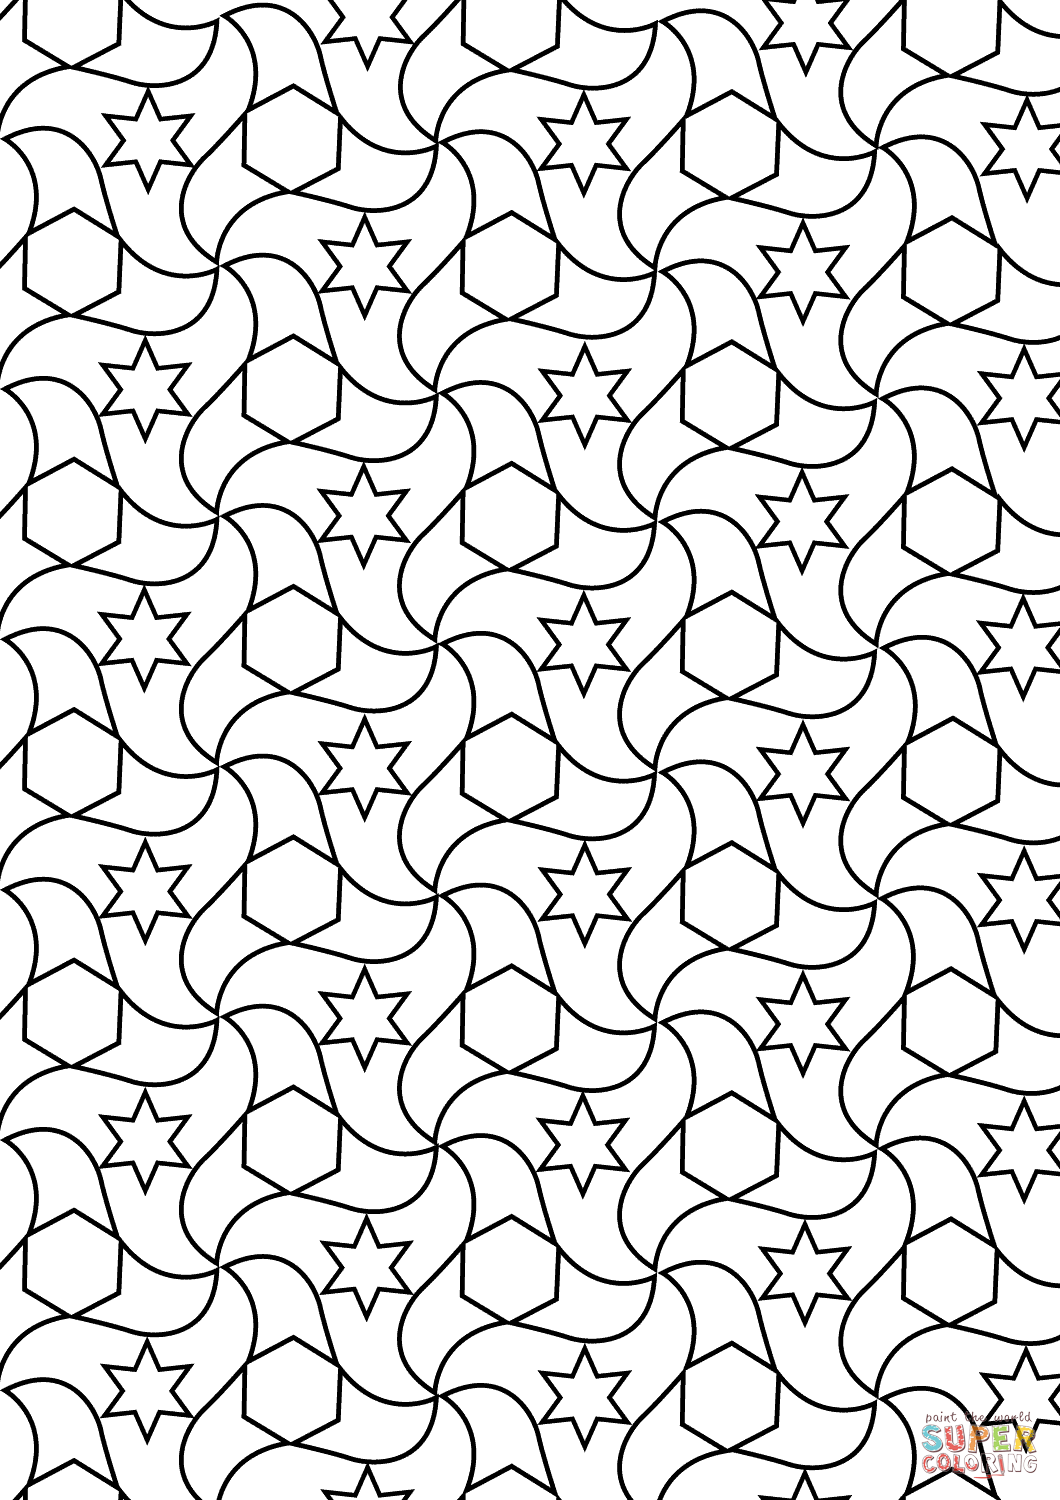 Alhambra tessellations coloring page free printable coloring pages geometric coloring pages tessellation patterns free printable coloring pages